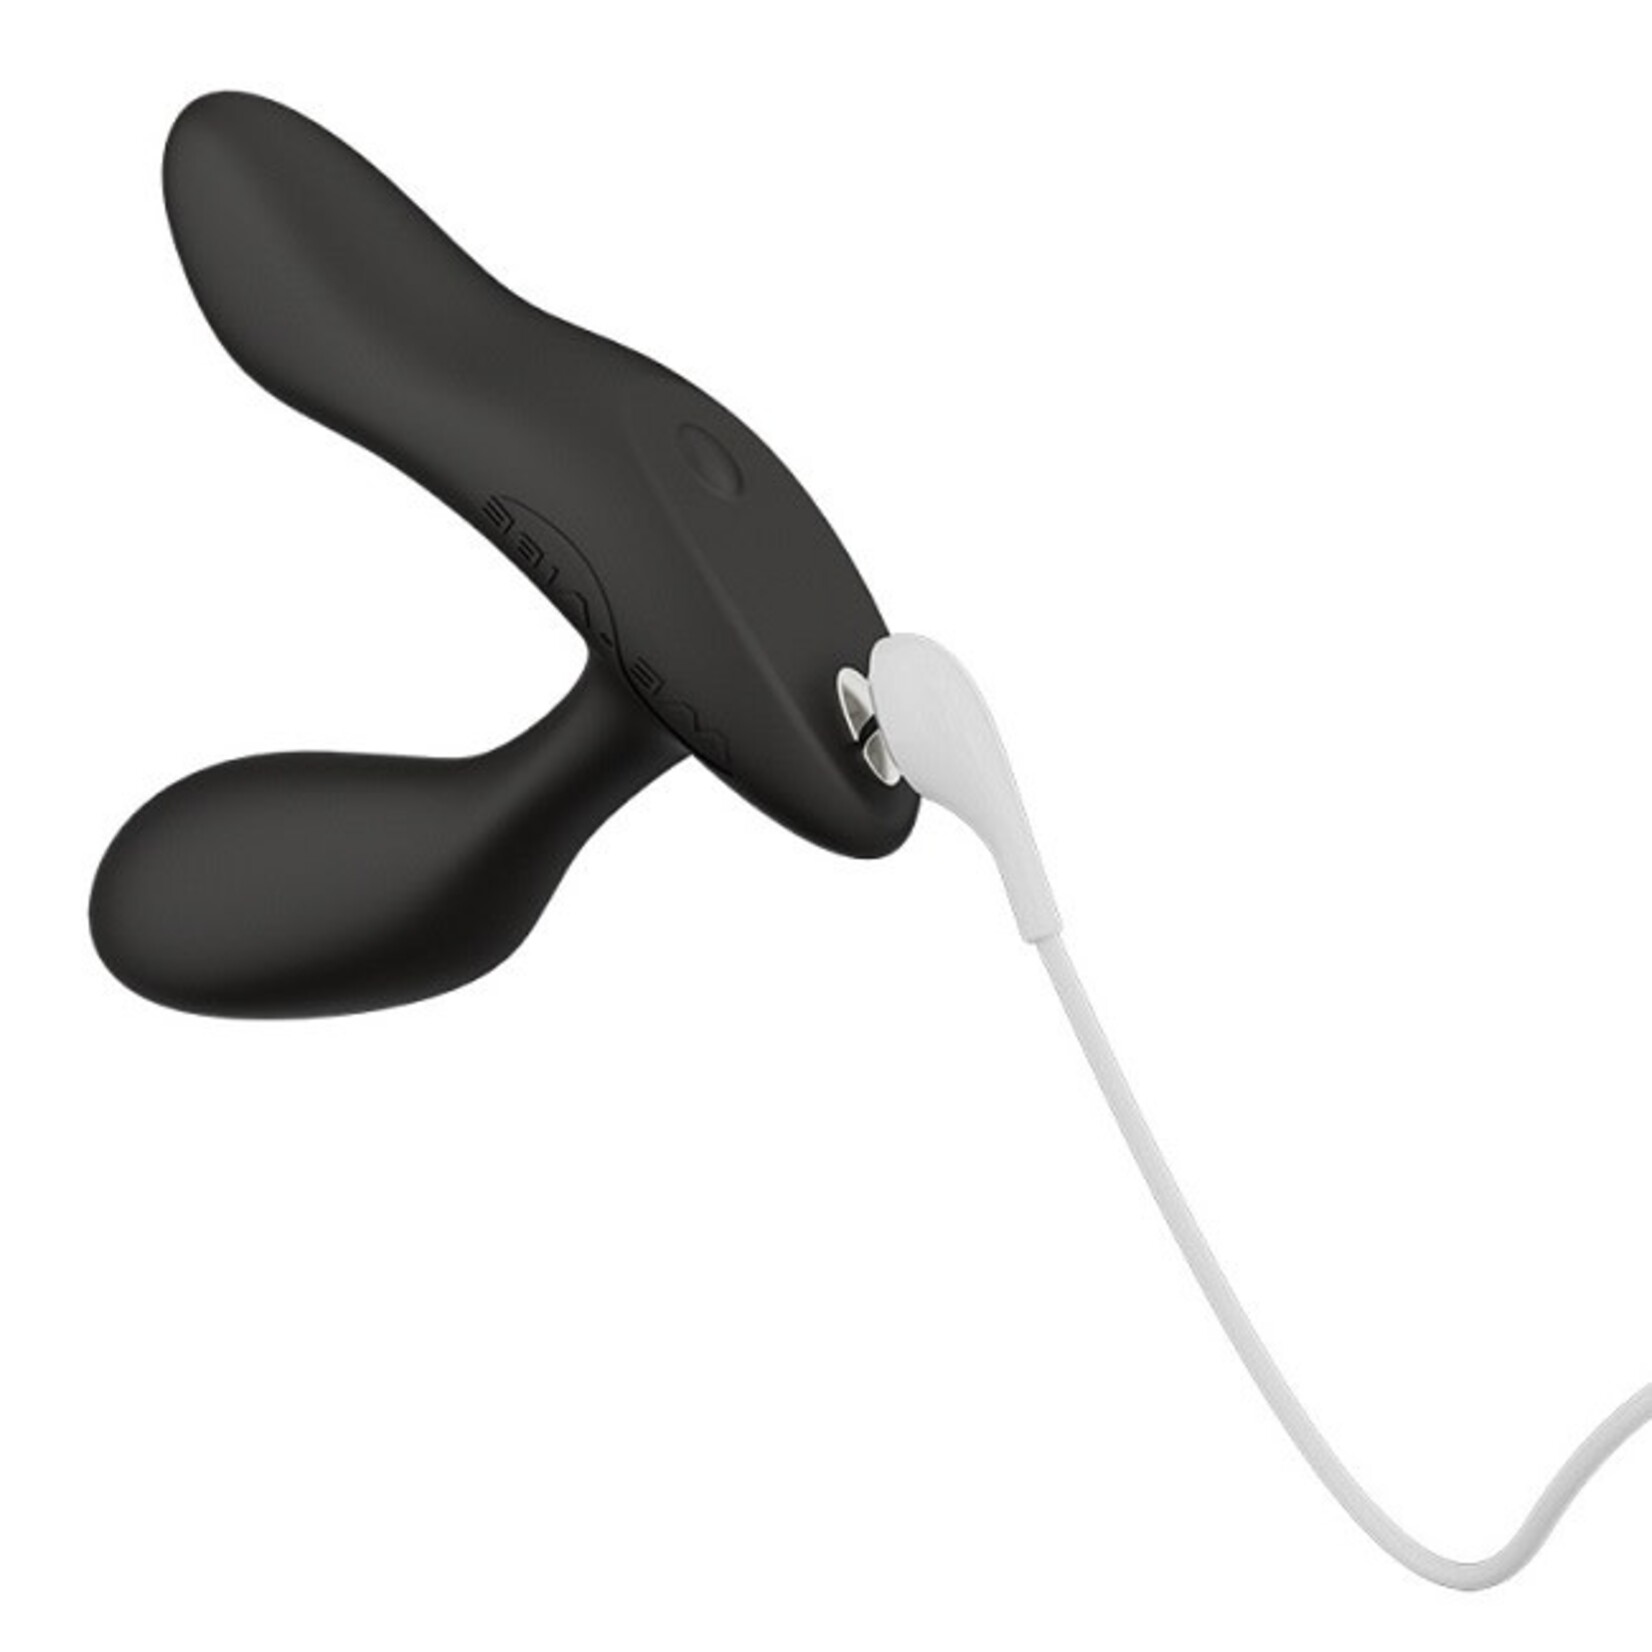 We-Vibe We-Vibe Vector+